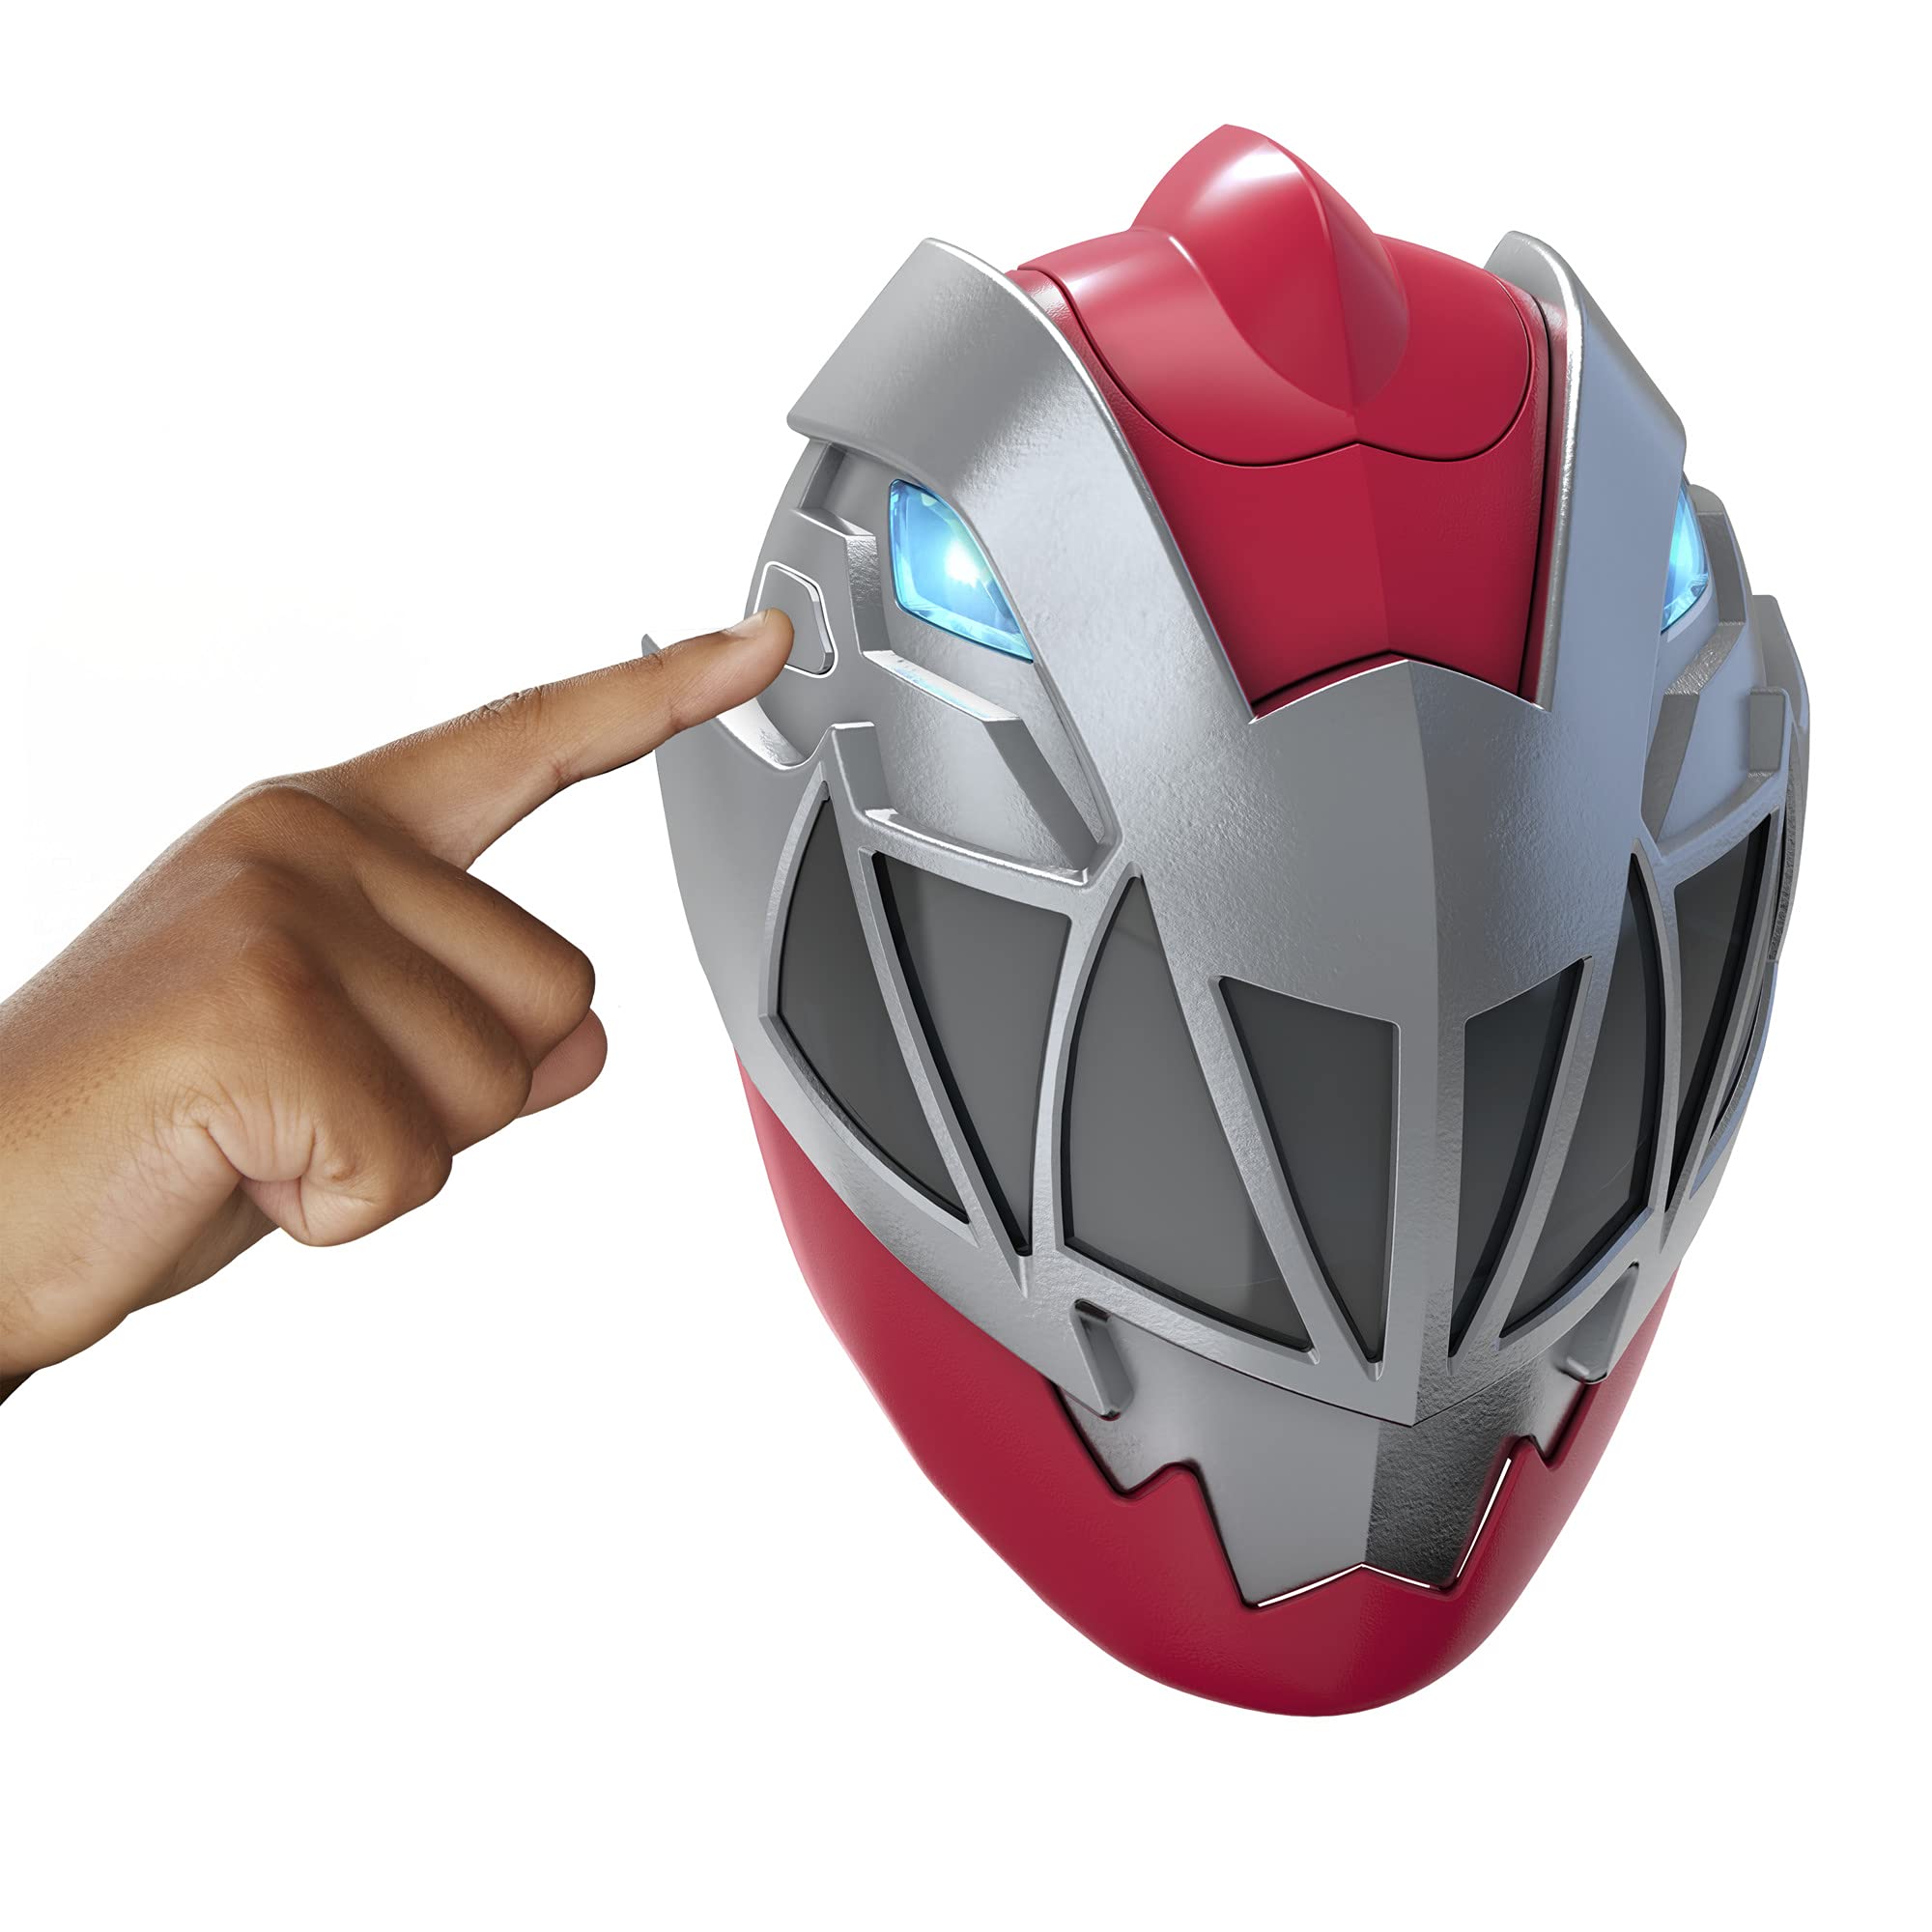 Power Rangers Dino Fury Red Ranger Electronic Mask Roleplay Toy for Costume and Dress Up Inspired by The TV Show Ages 5 and Up